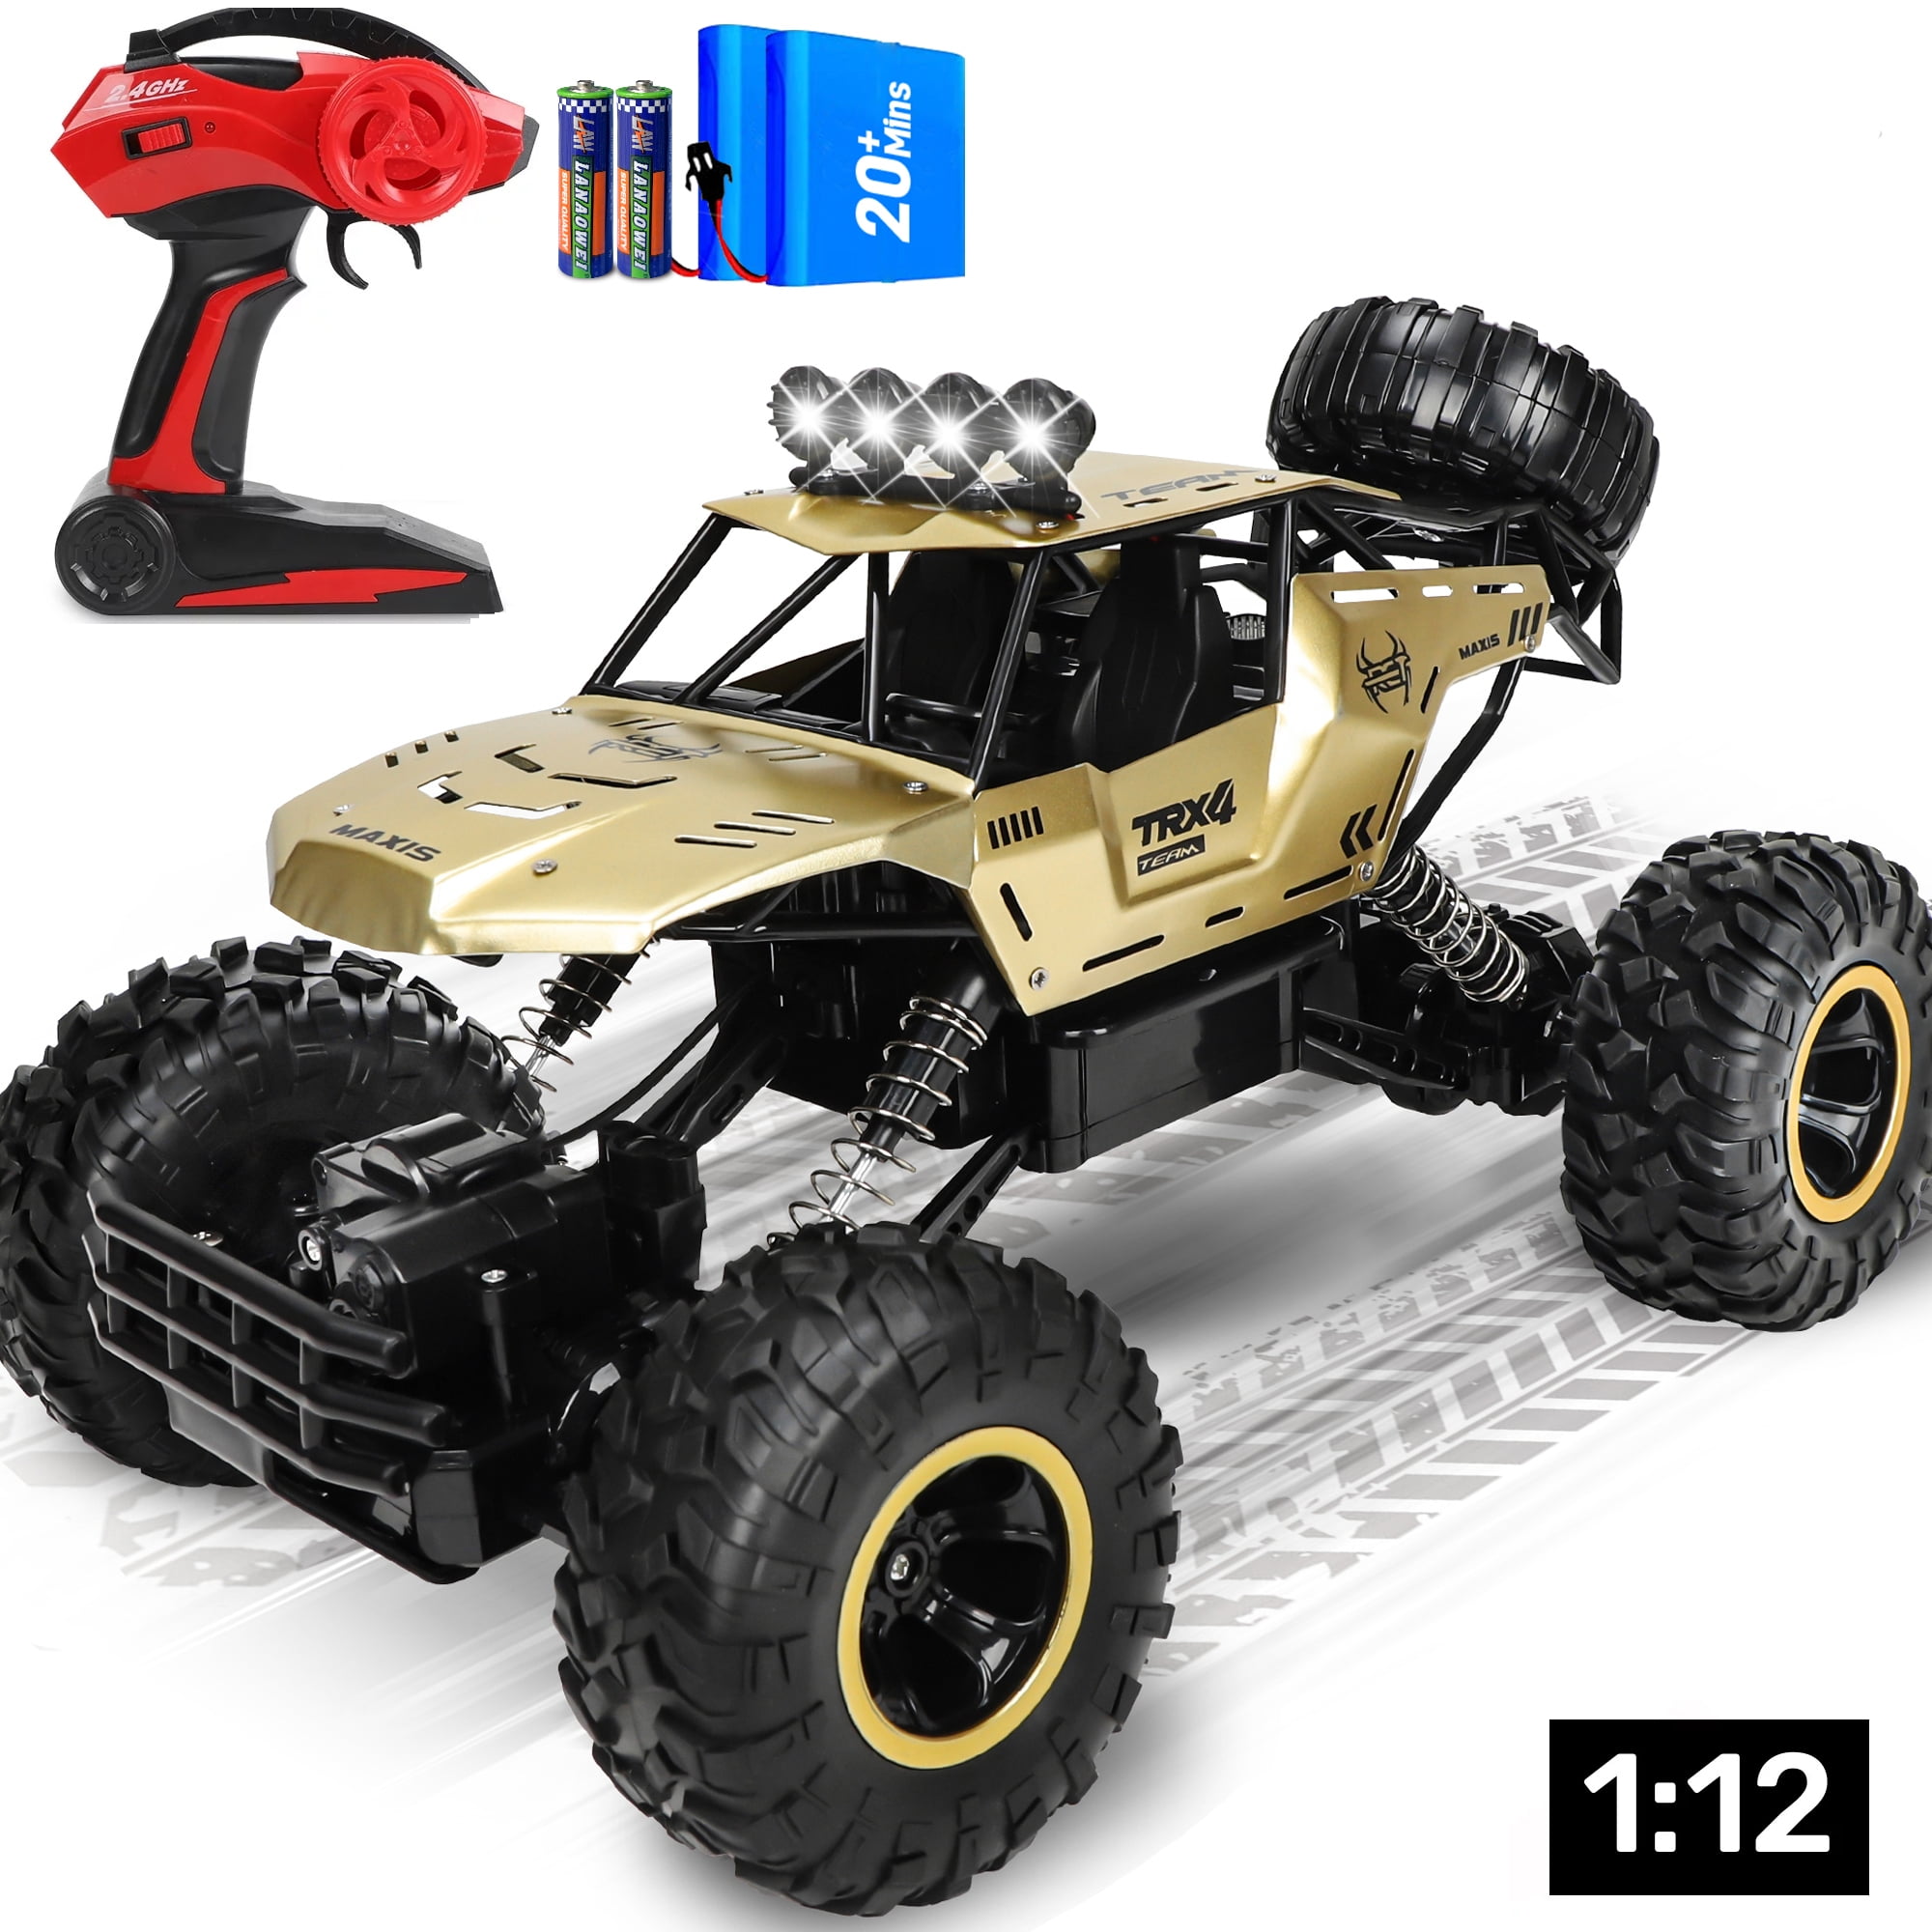 Wisairt Large RC Cars, 1:12 4WD Large Remote Control Monster Truck 2.4 GHz Alloy RC Cars for Kids Adults Aged 6 + Birthday Christmas Gifts (Gold)